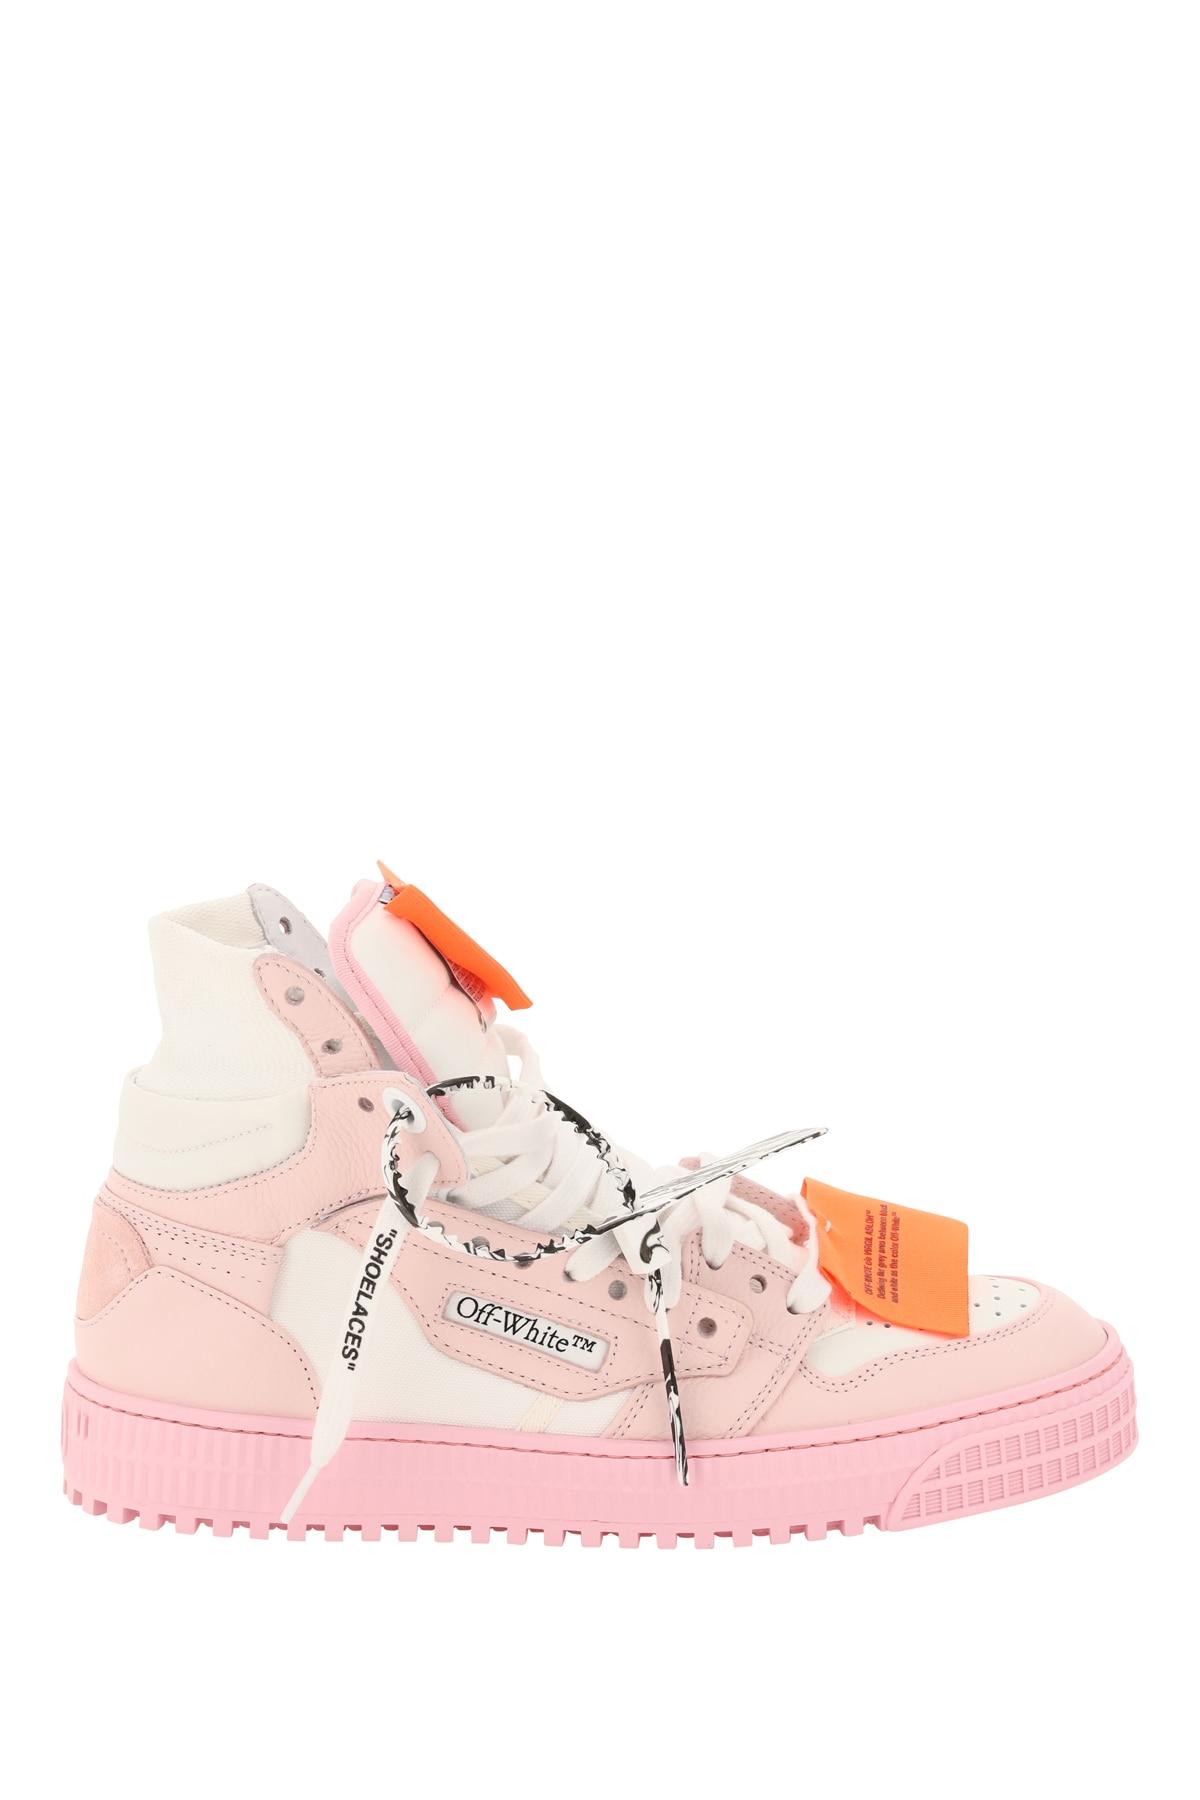 Womens Shoes Trainers High-top trainers Off-White c/o Virgil Abloh Pink Off Court 3.0 Sneakers 